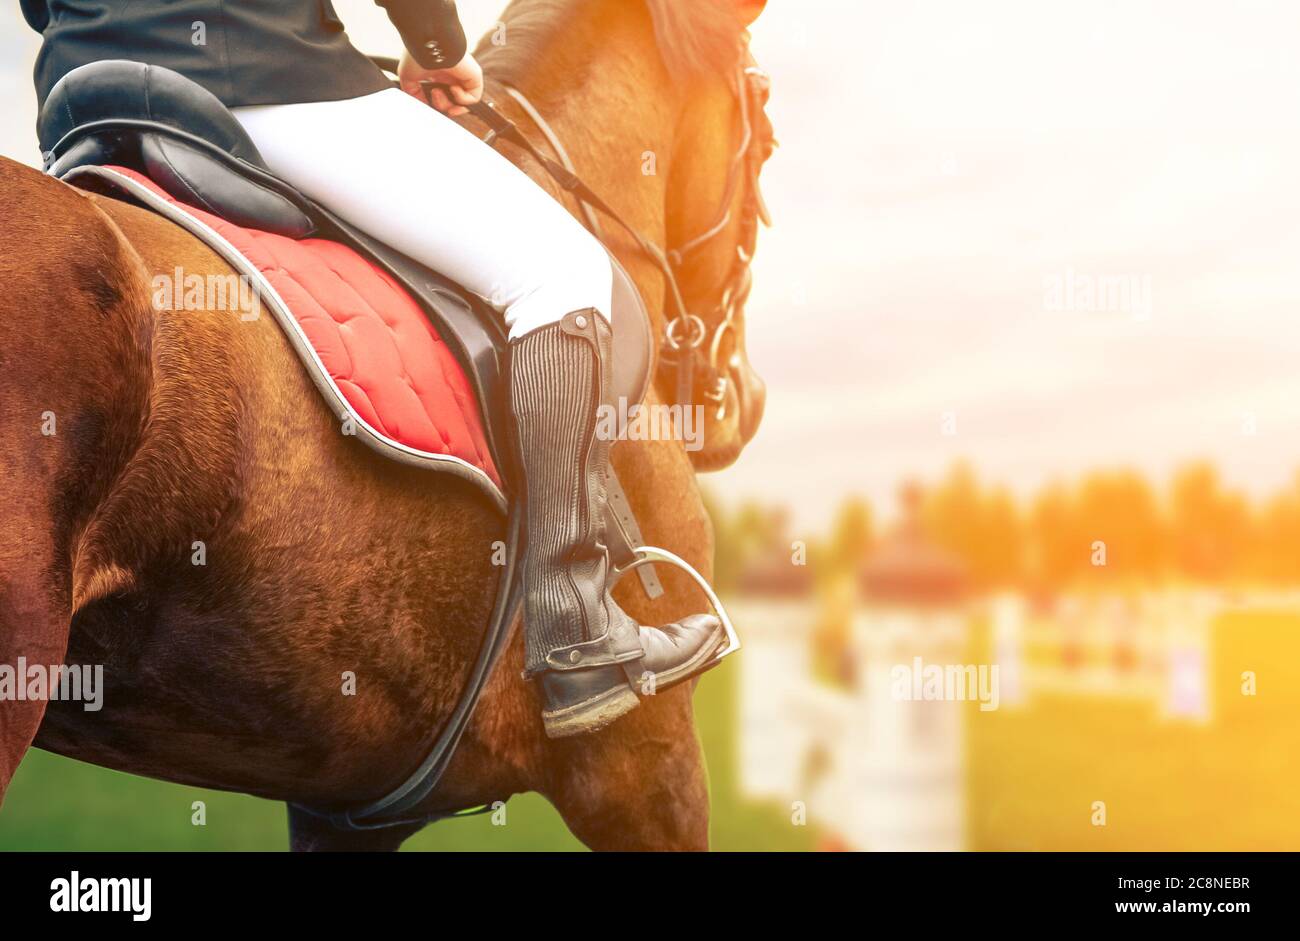 Horse riding closeup on show jumping field, toned image Stock Photo